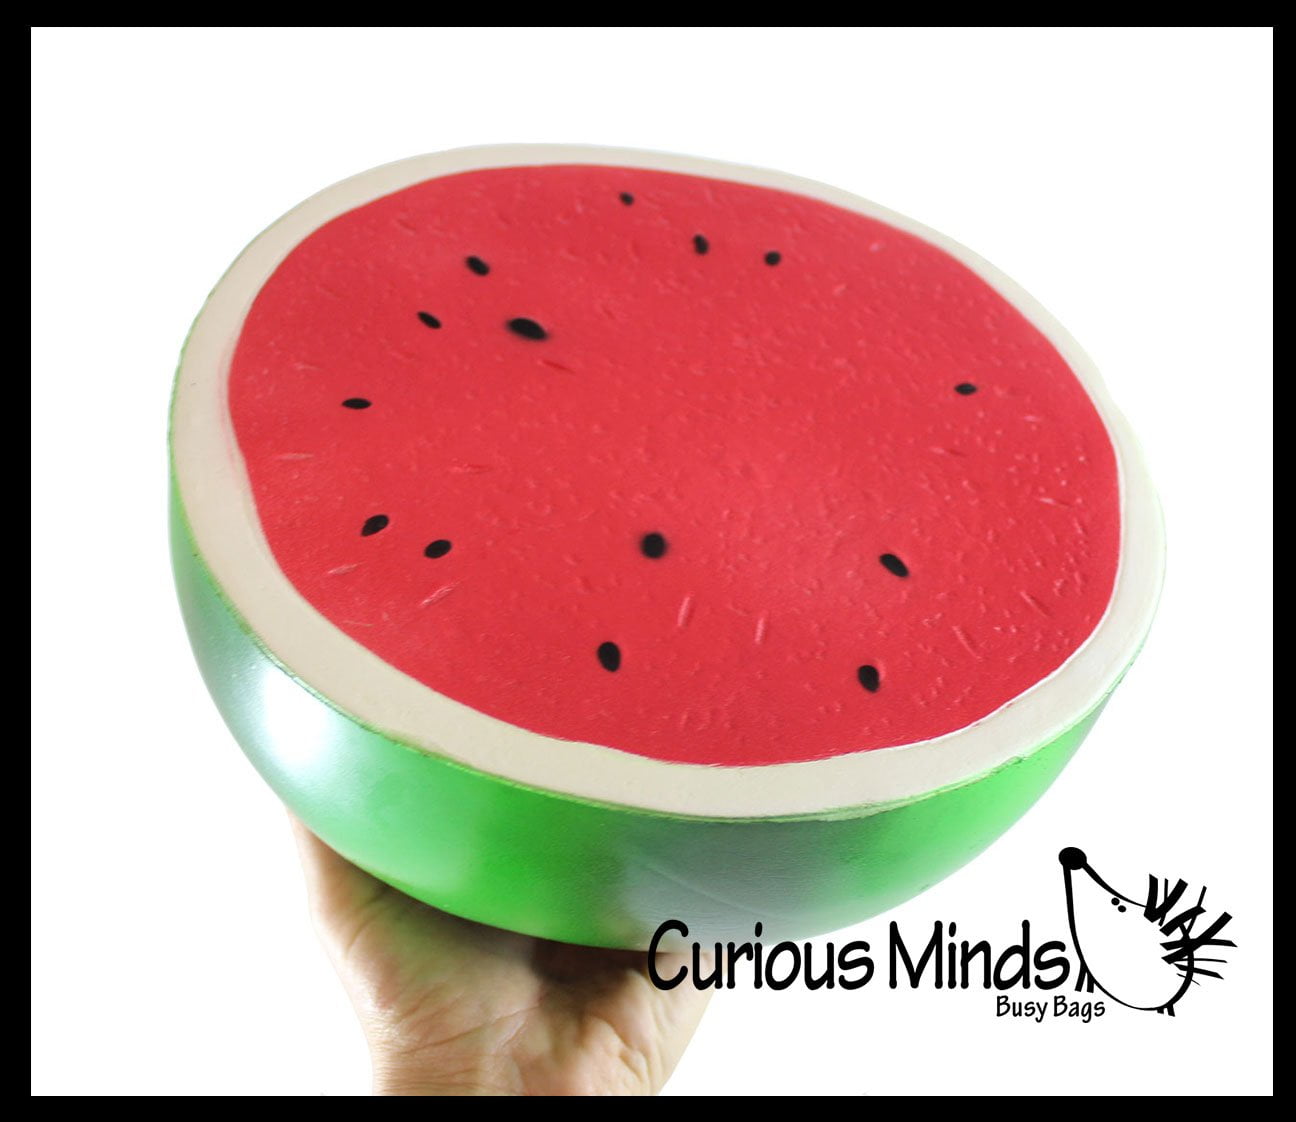 Junson Cute Fruit Squishy Toys Squeeze Watermelon Slow Rising Extrusion Toy-Red 